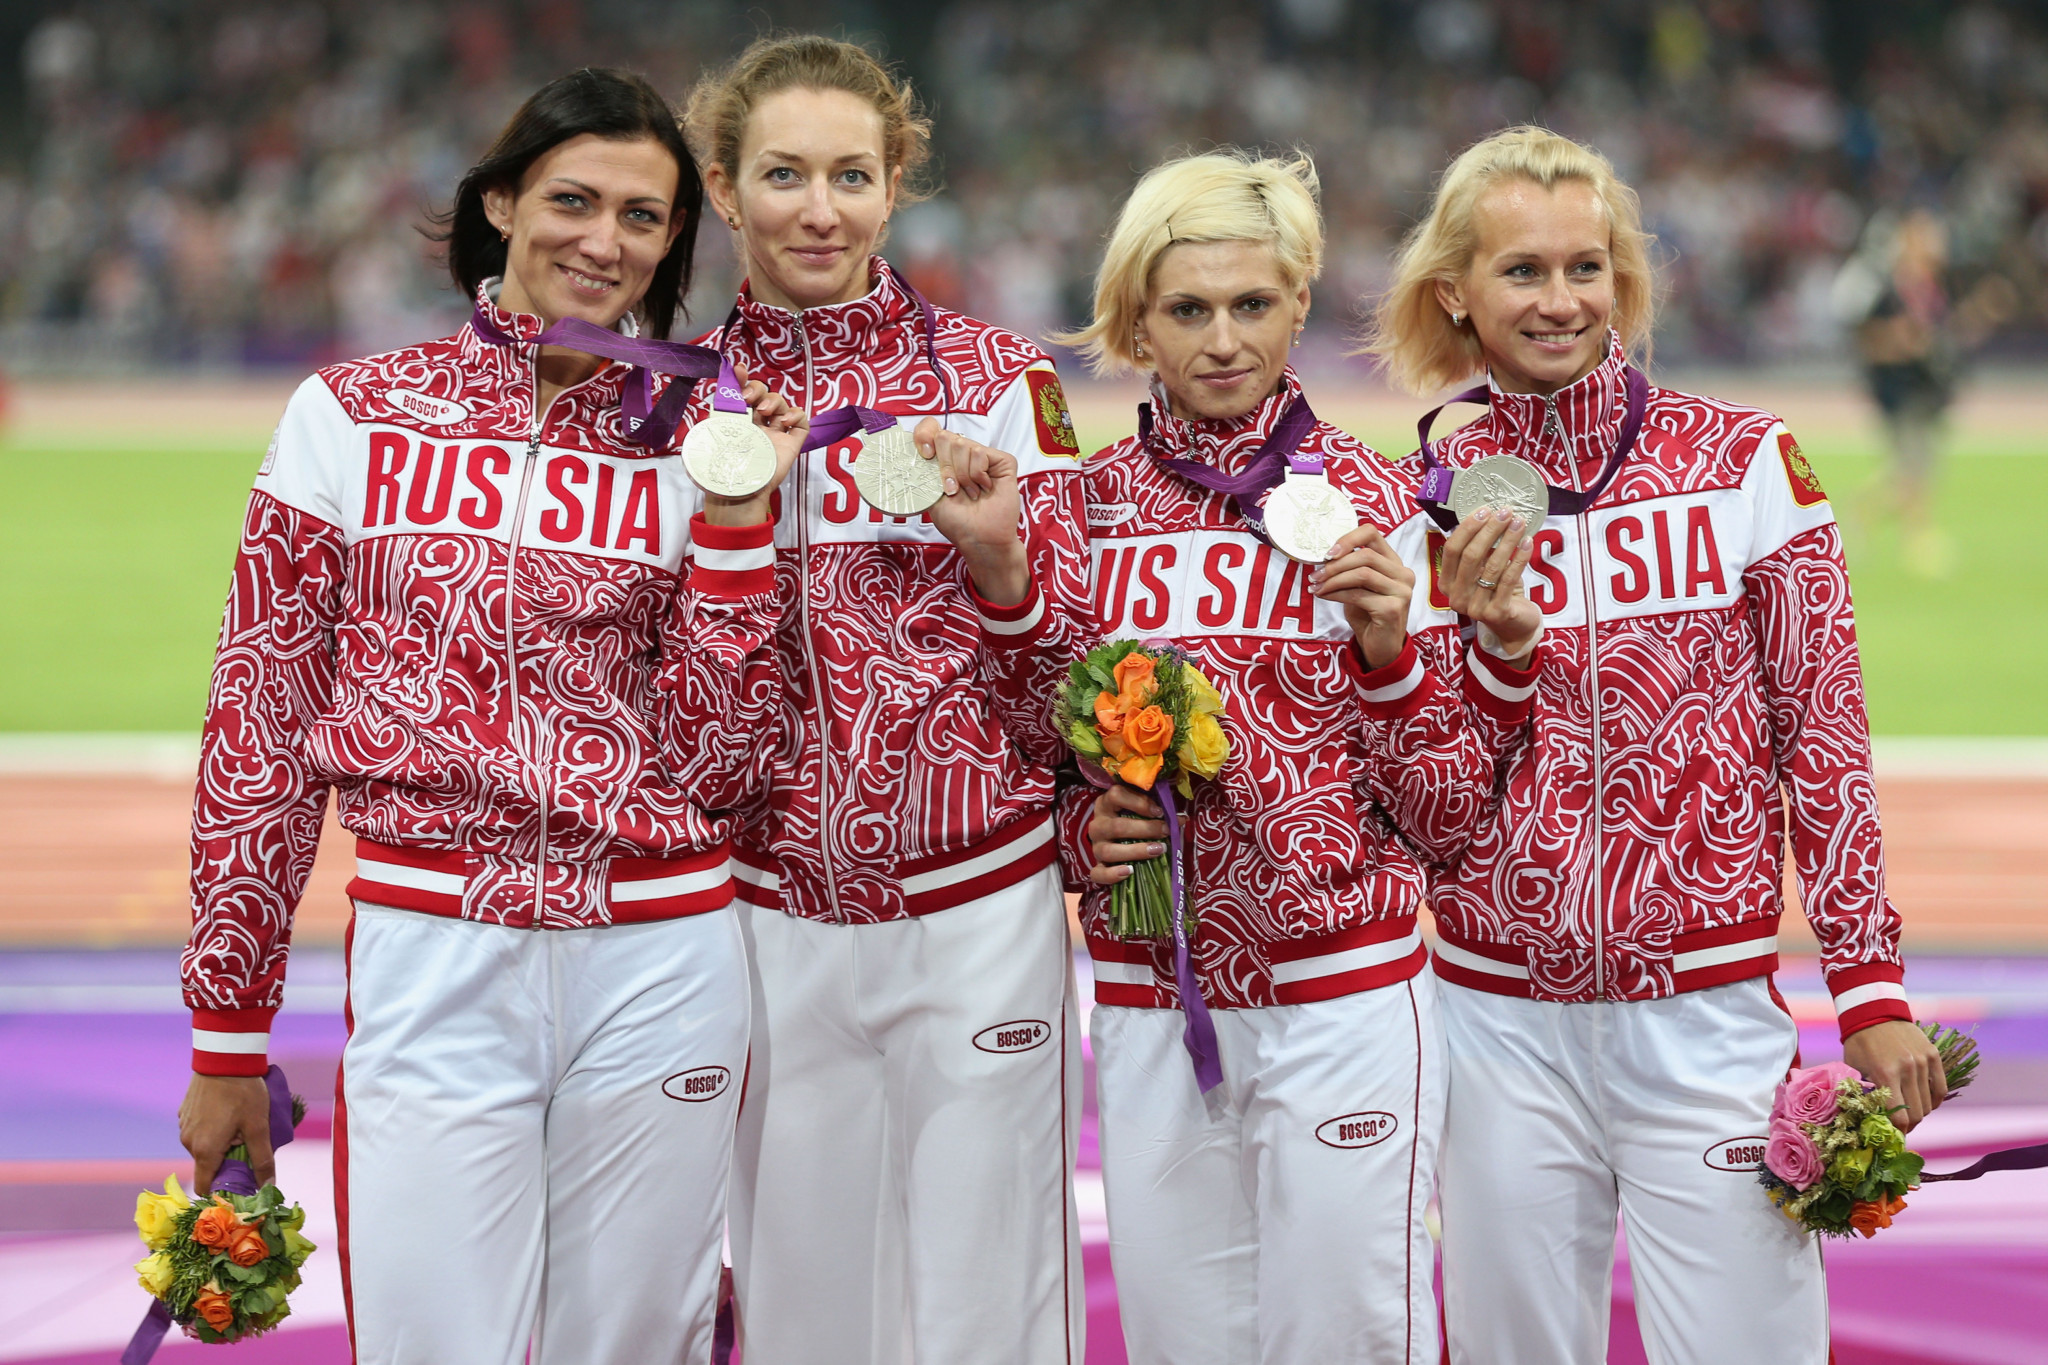 The disqualification by CAS of Tatyana Firova, second right, means three of the four Russian runners who won the Olympic silver medal in the 4x400m at London 2012 have now been disqualified for doping ©Getty Images